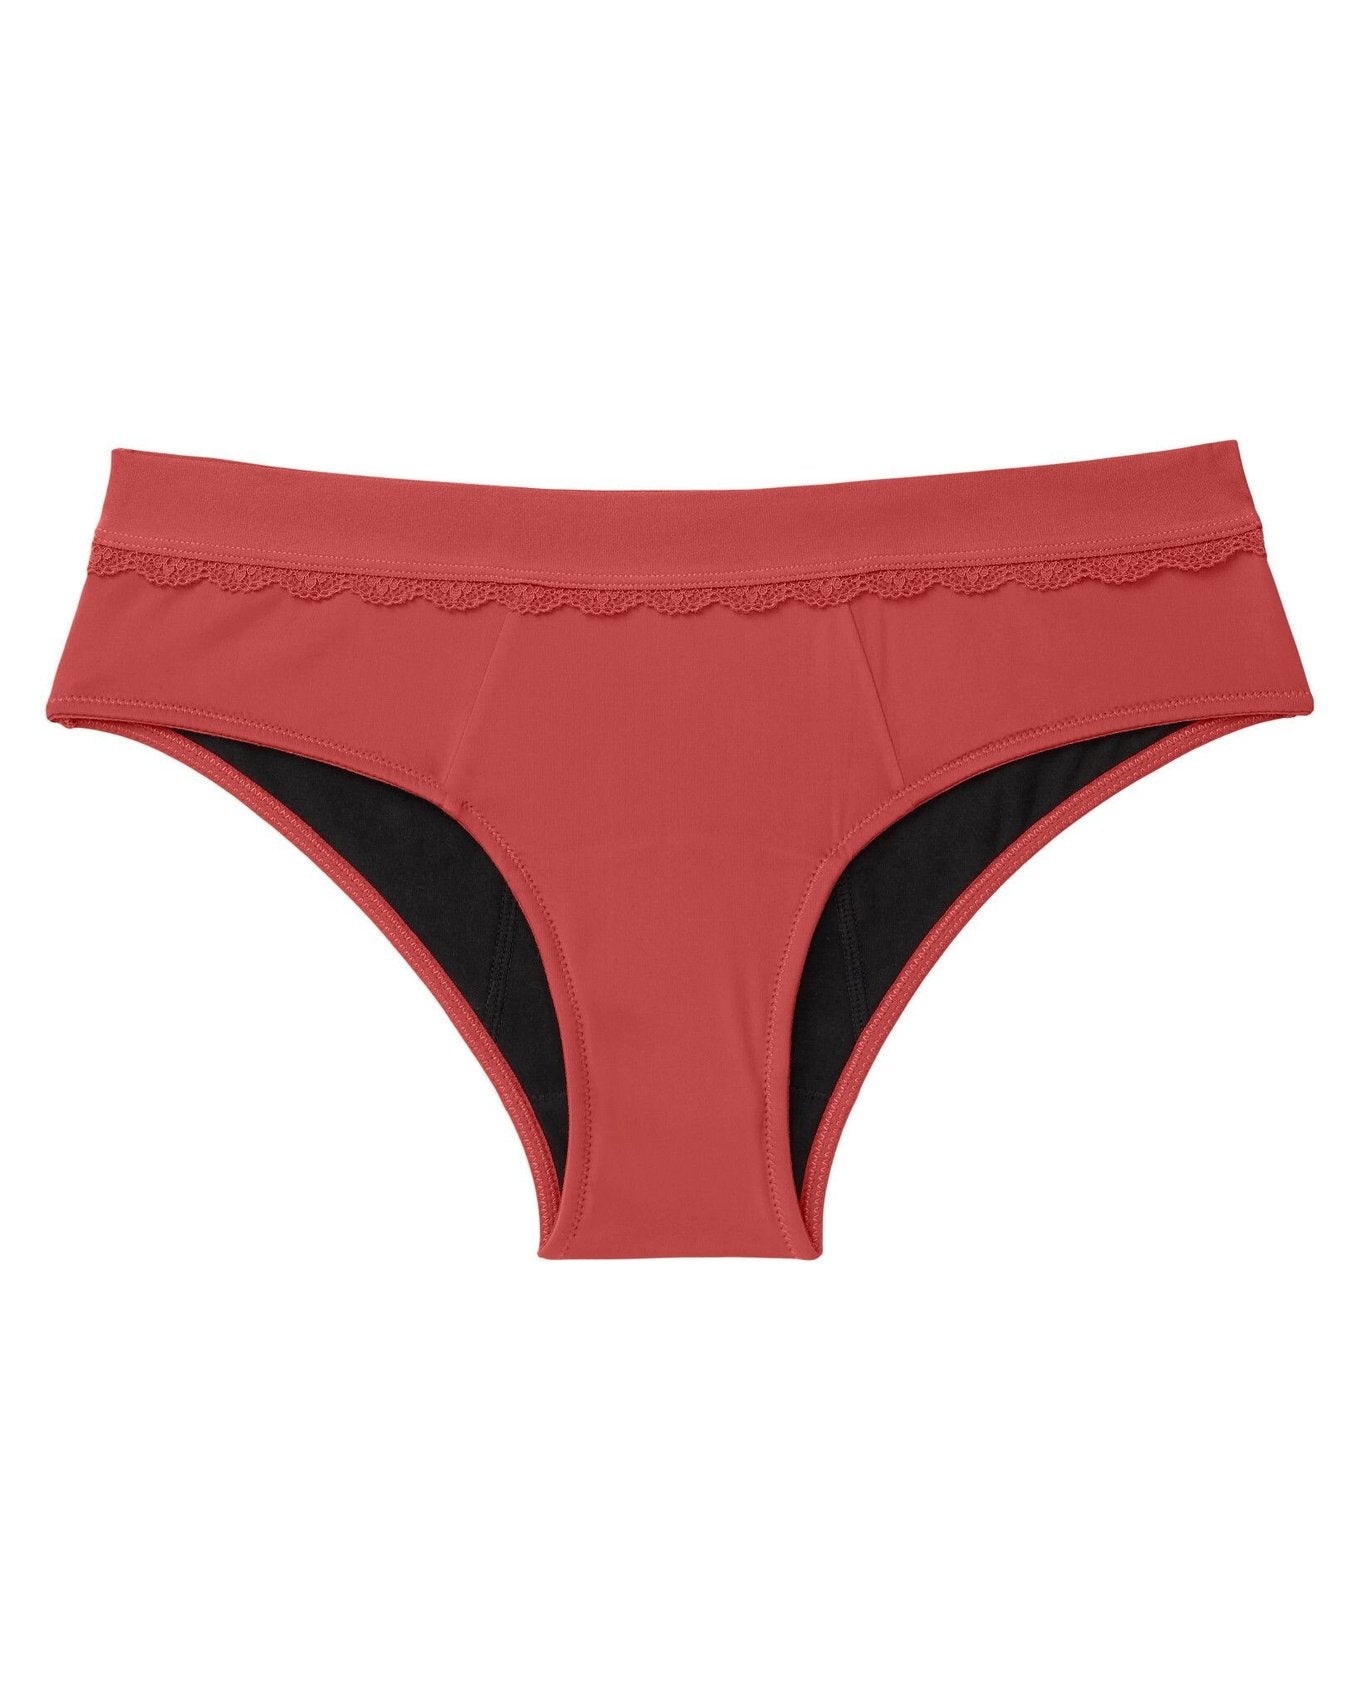 Joyja Cindy period-proof panty in color Baked Apple and shape cheeky